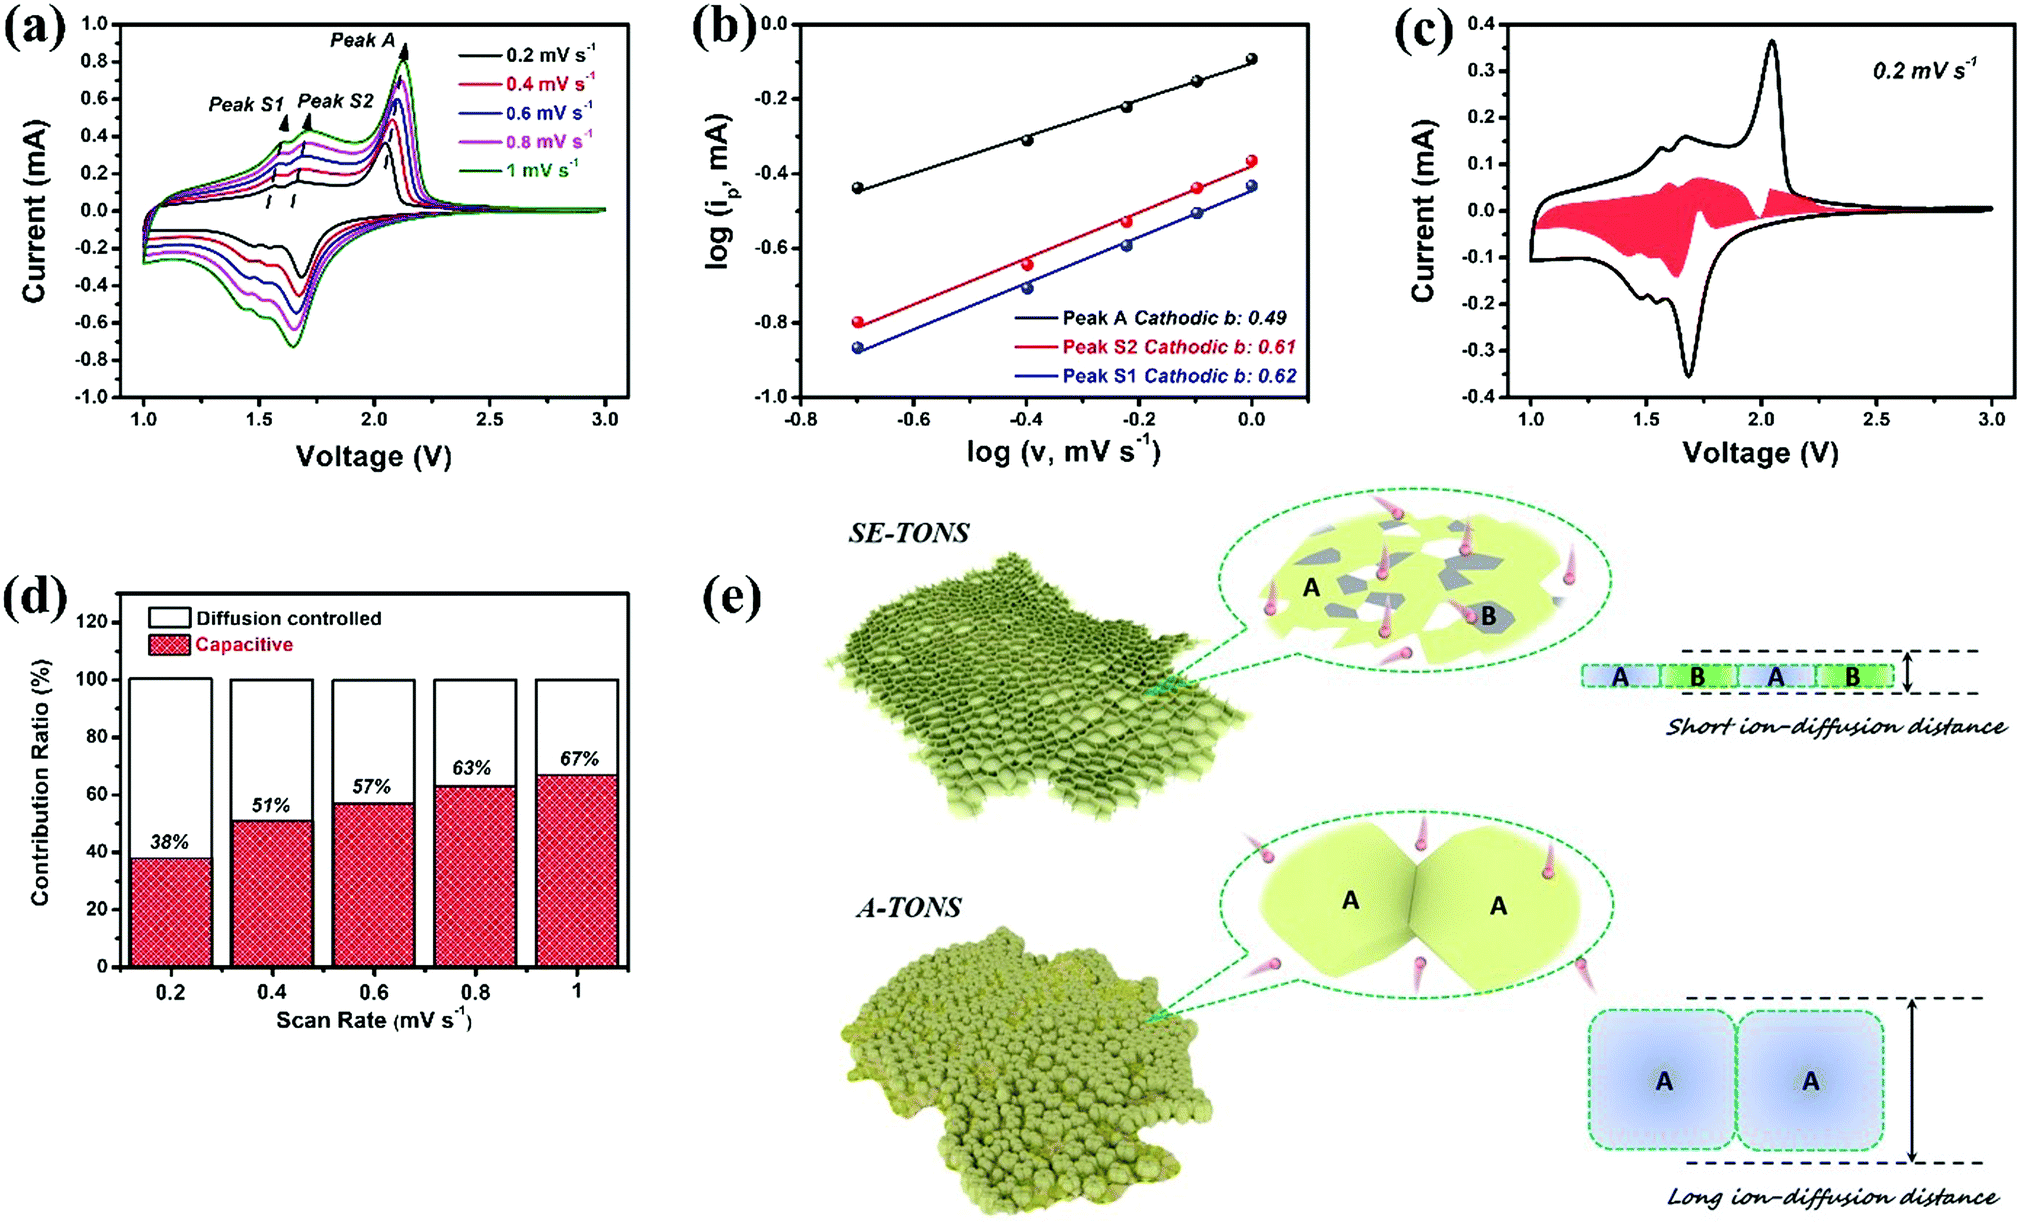 Surface-reconstructed formation of hierarchical TiO 2 mesoporous 